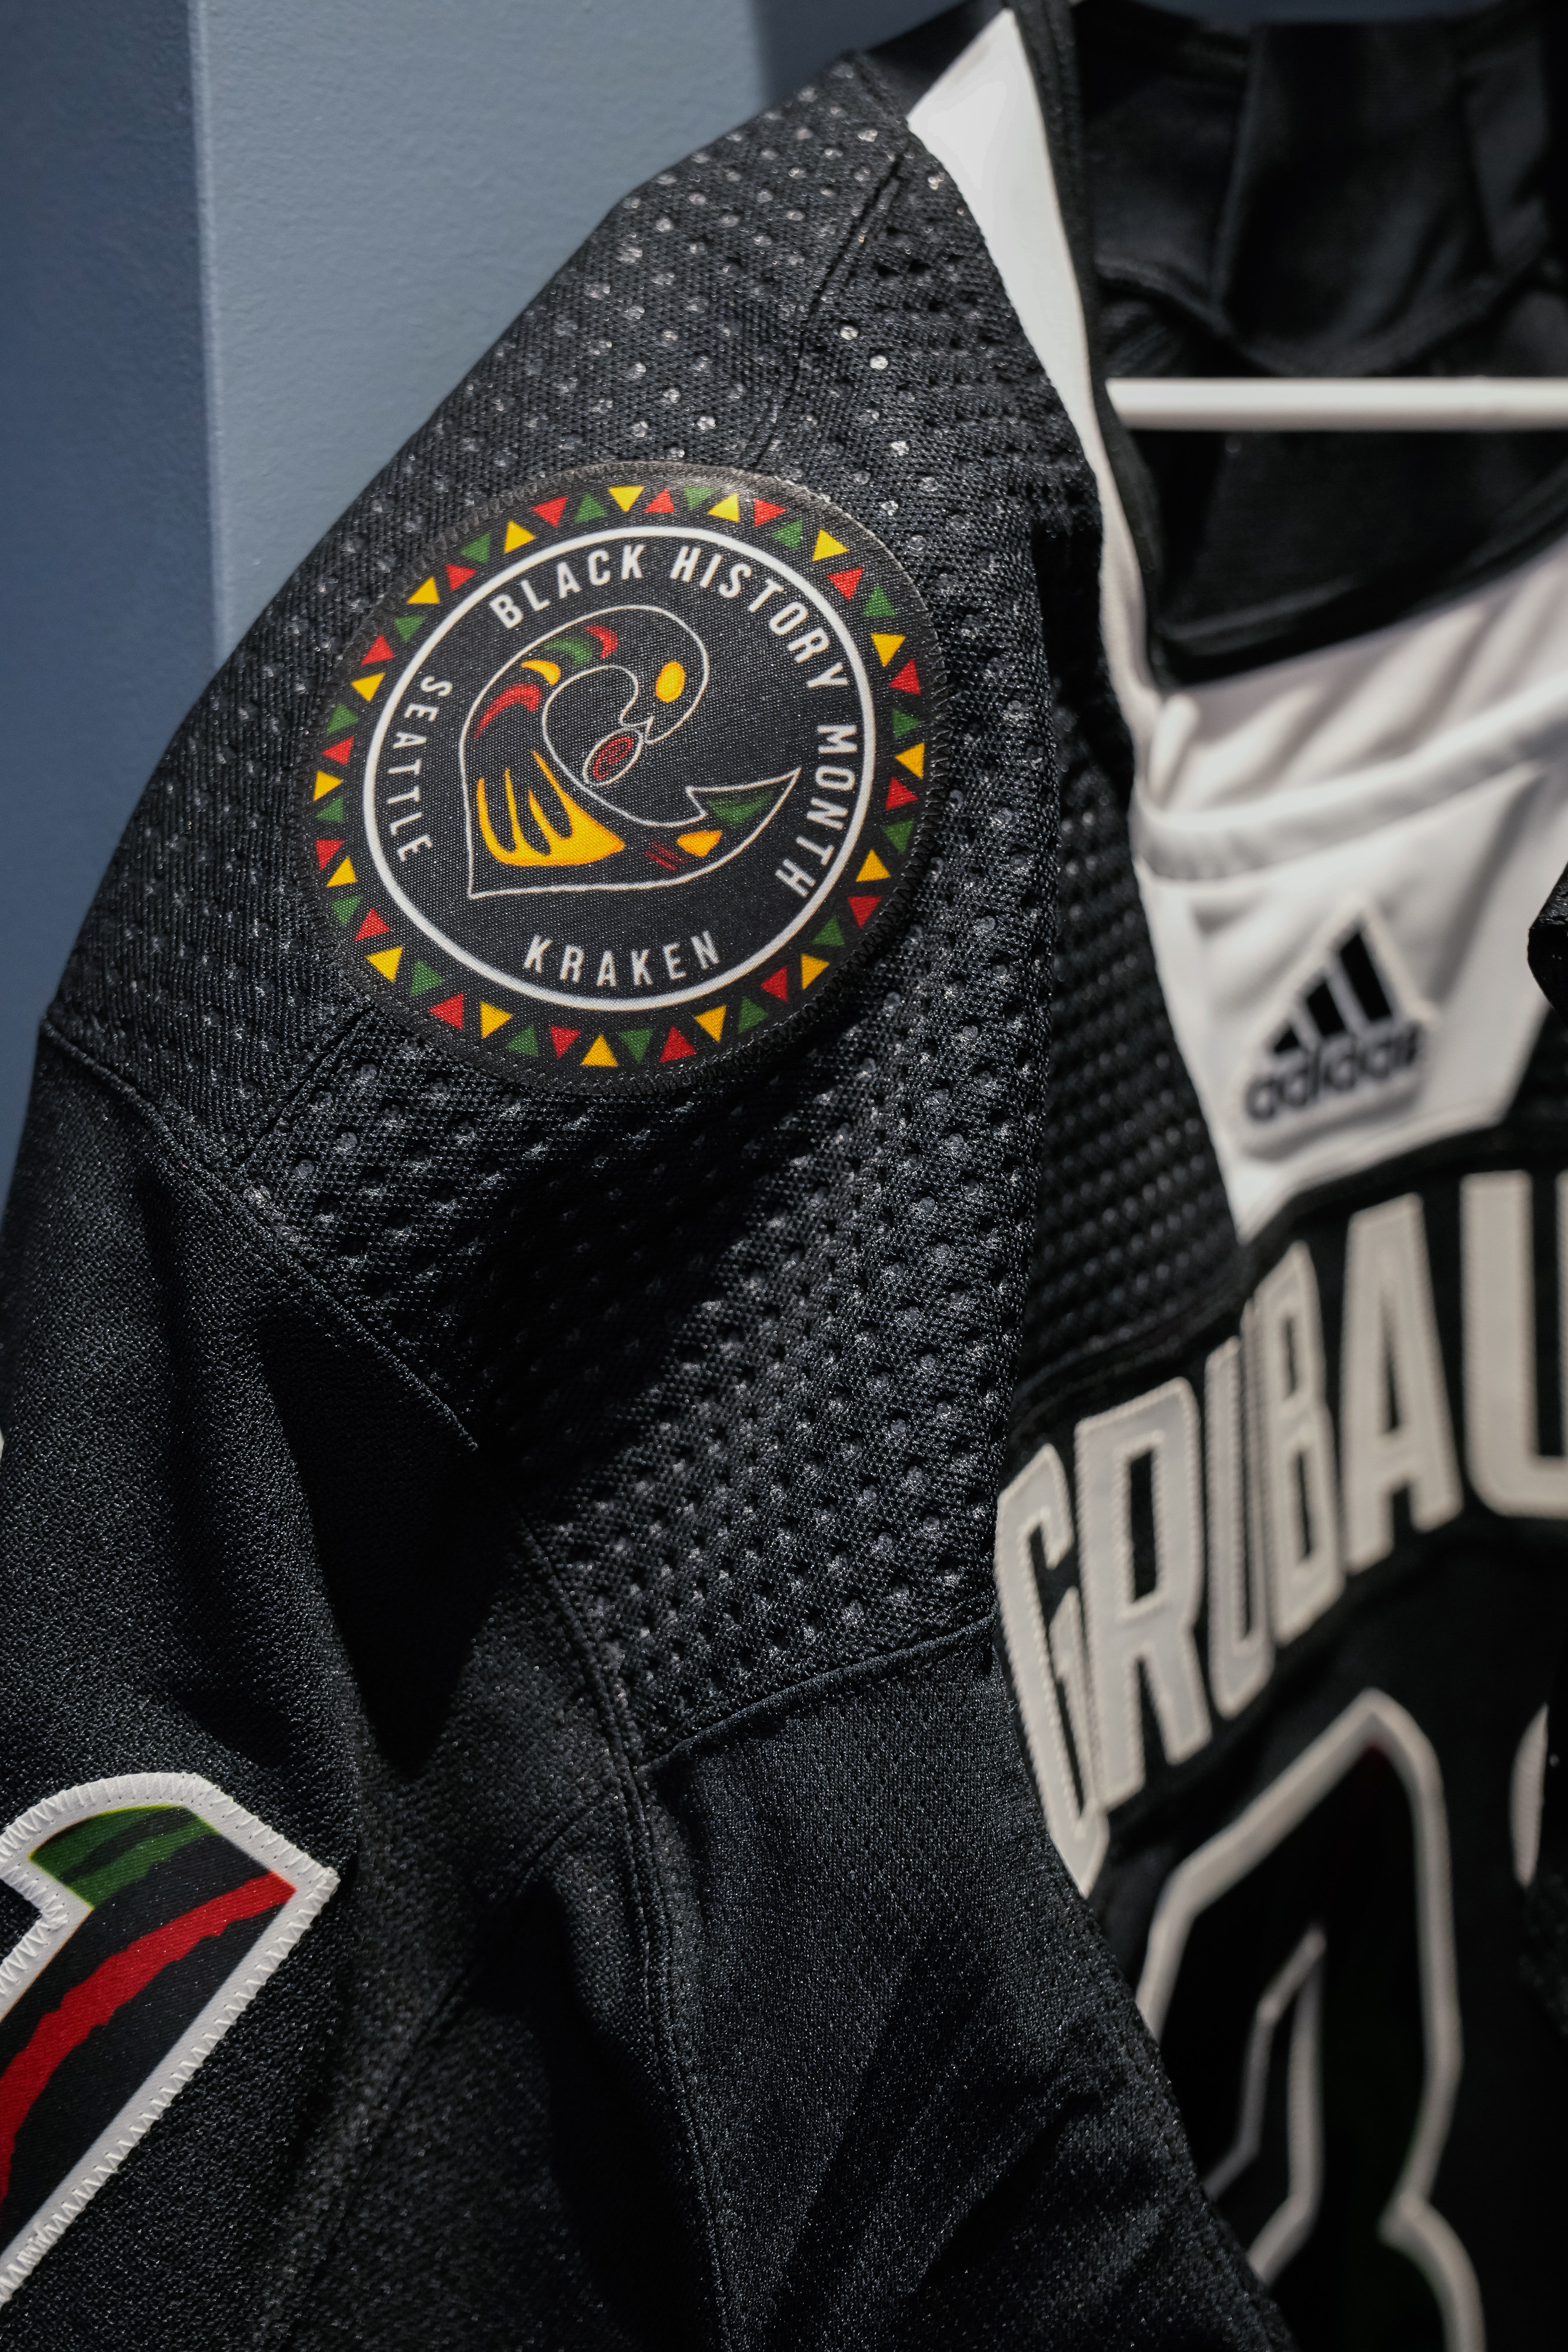 NHL on X: During warmups, the @SeattleKraken wore special jerseys  celebrating Black History Month. These jerseys were created by local artist  RC Johnson & inspired by the Pan-African flag. #HockeyIsForEveryone   /